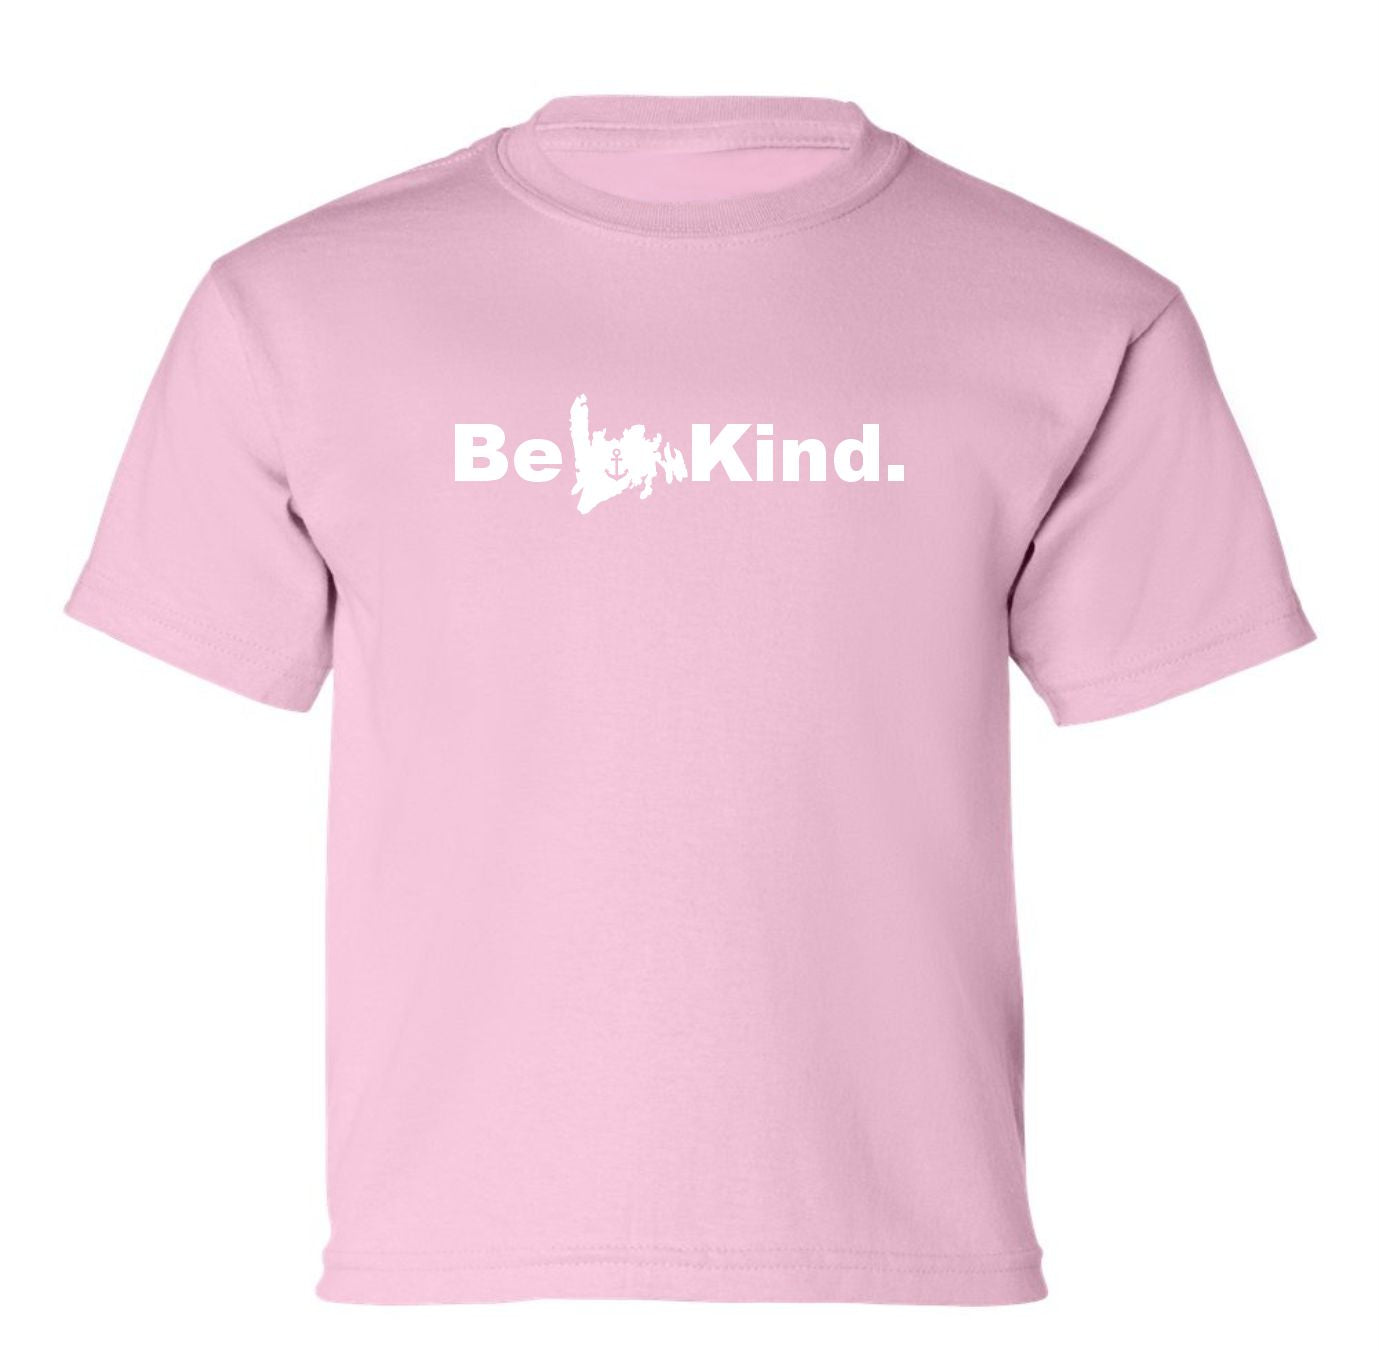 "Be Kind" Toddler/Youth T-Shirt